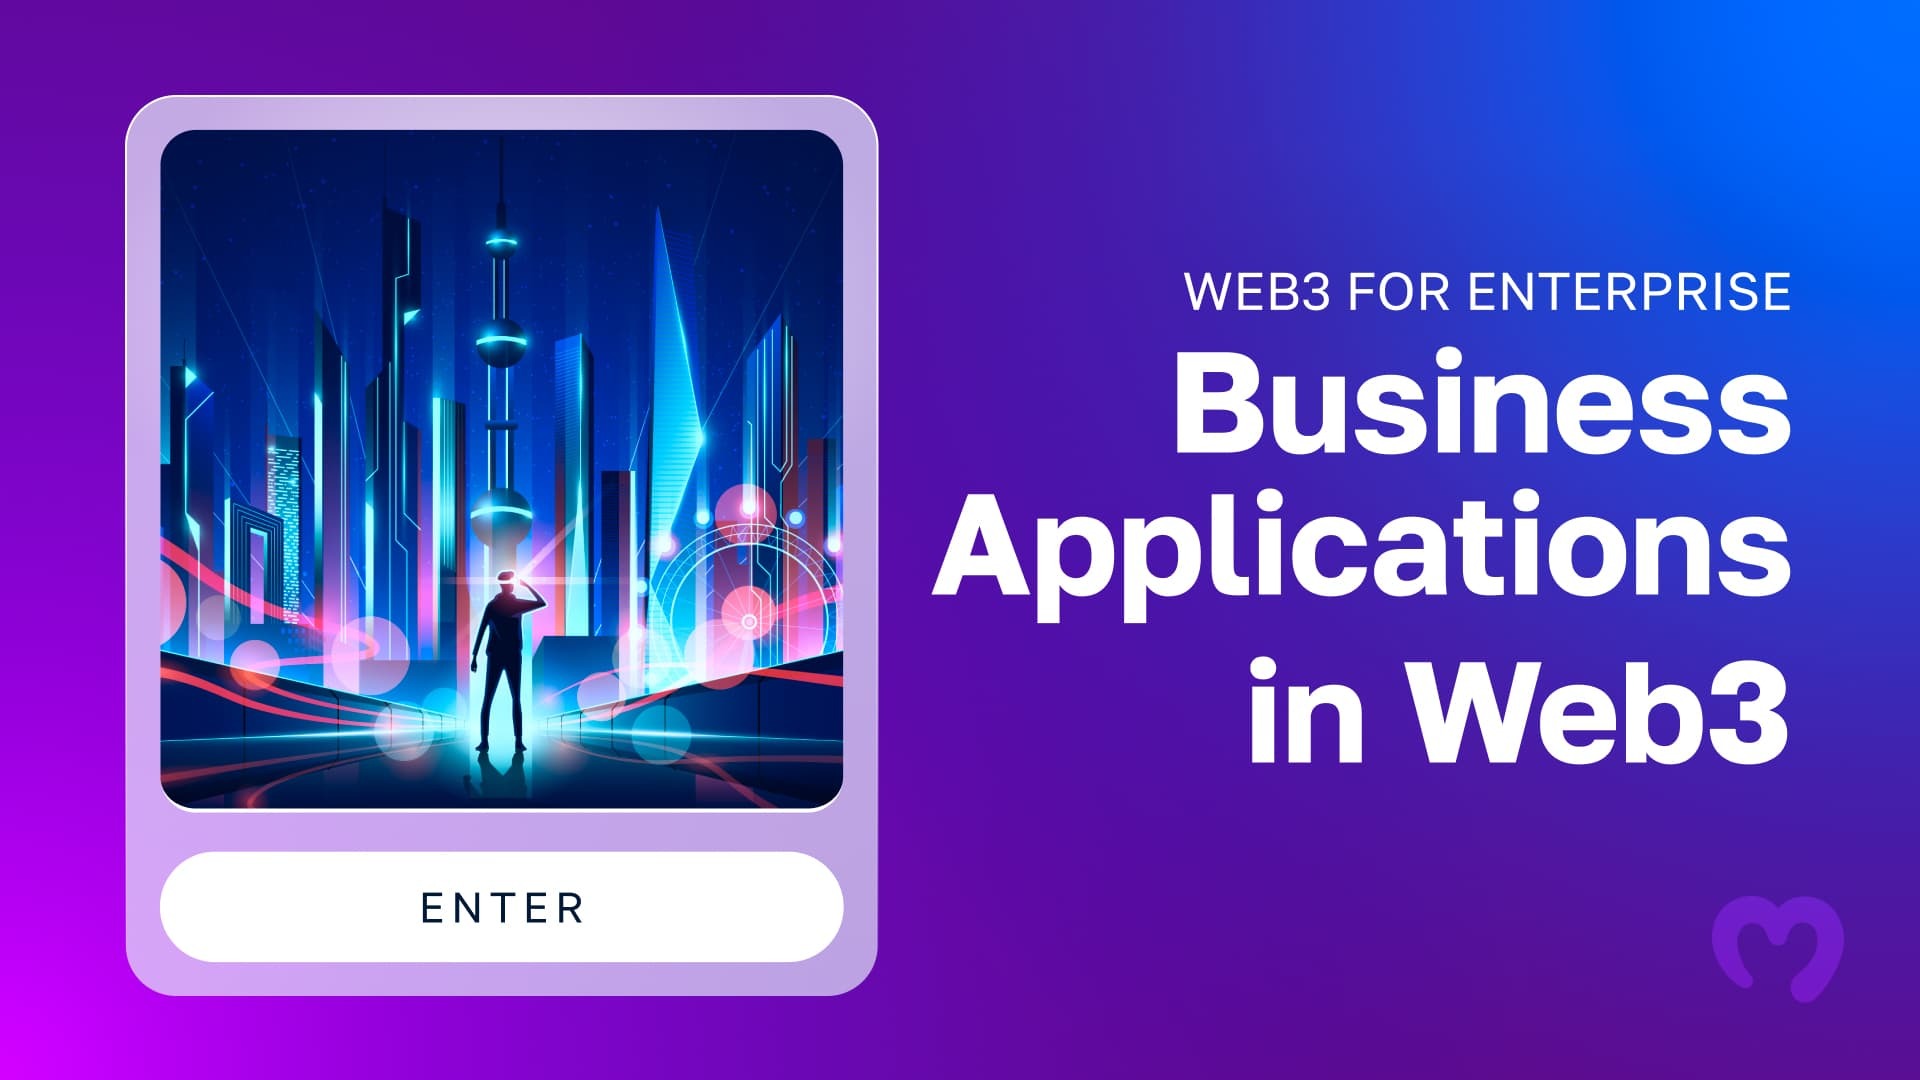 A metaverse gate and an entrance title saying Web3 for Enterprise - Business Applications in Web3.